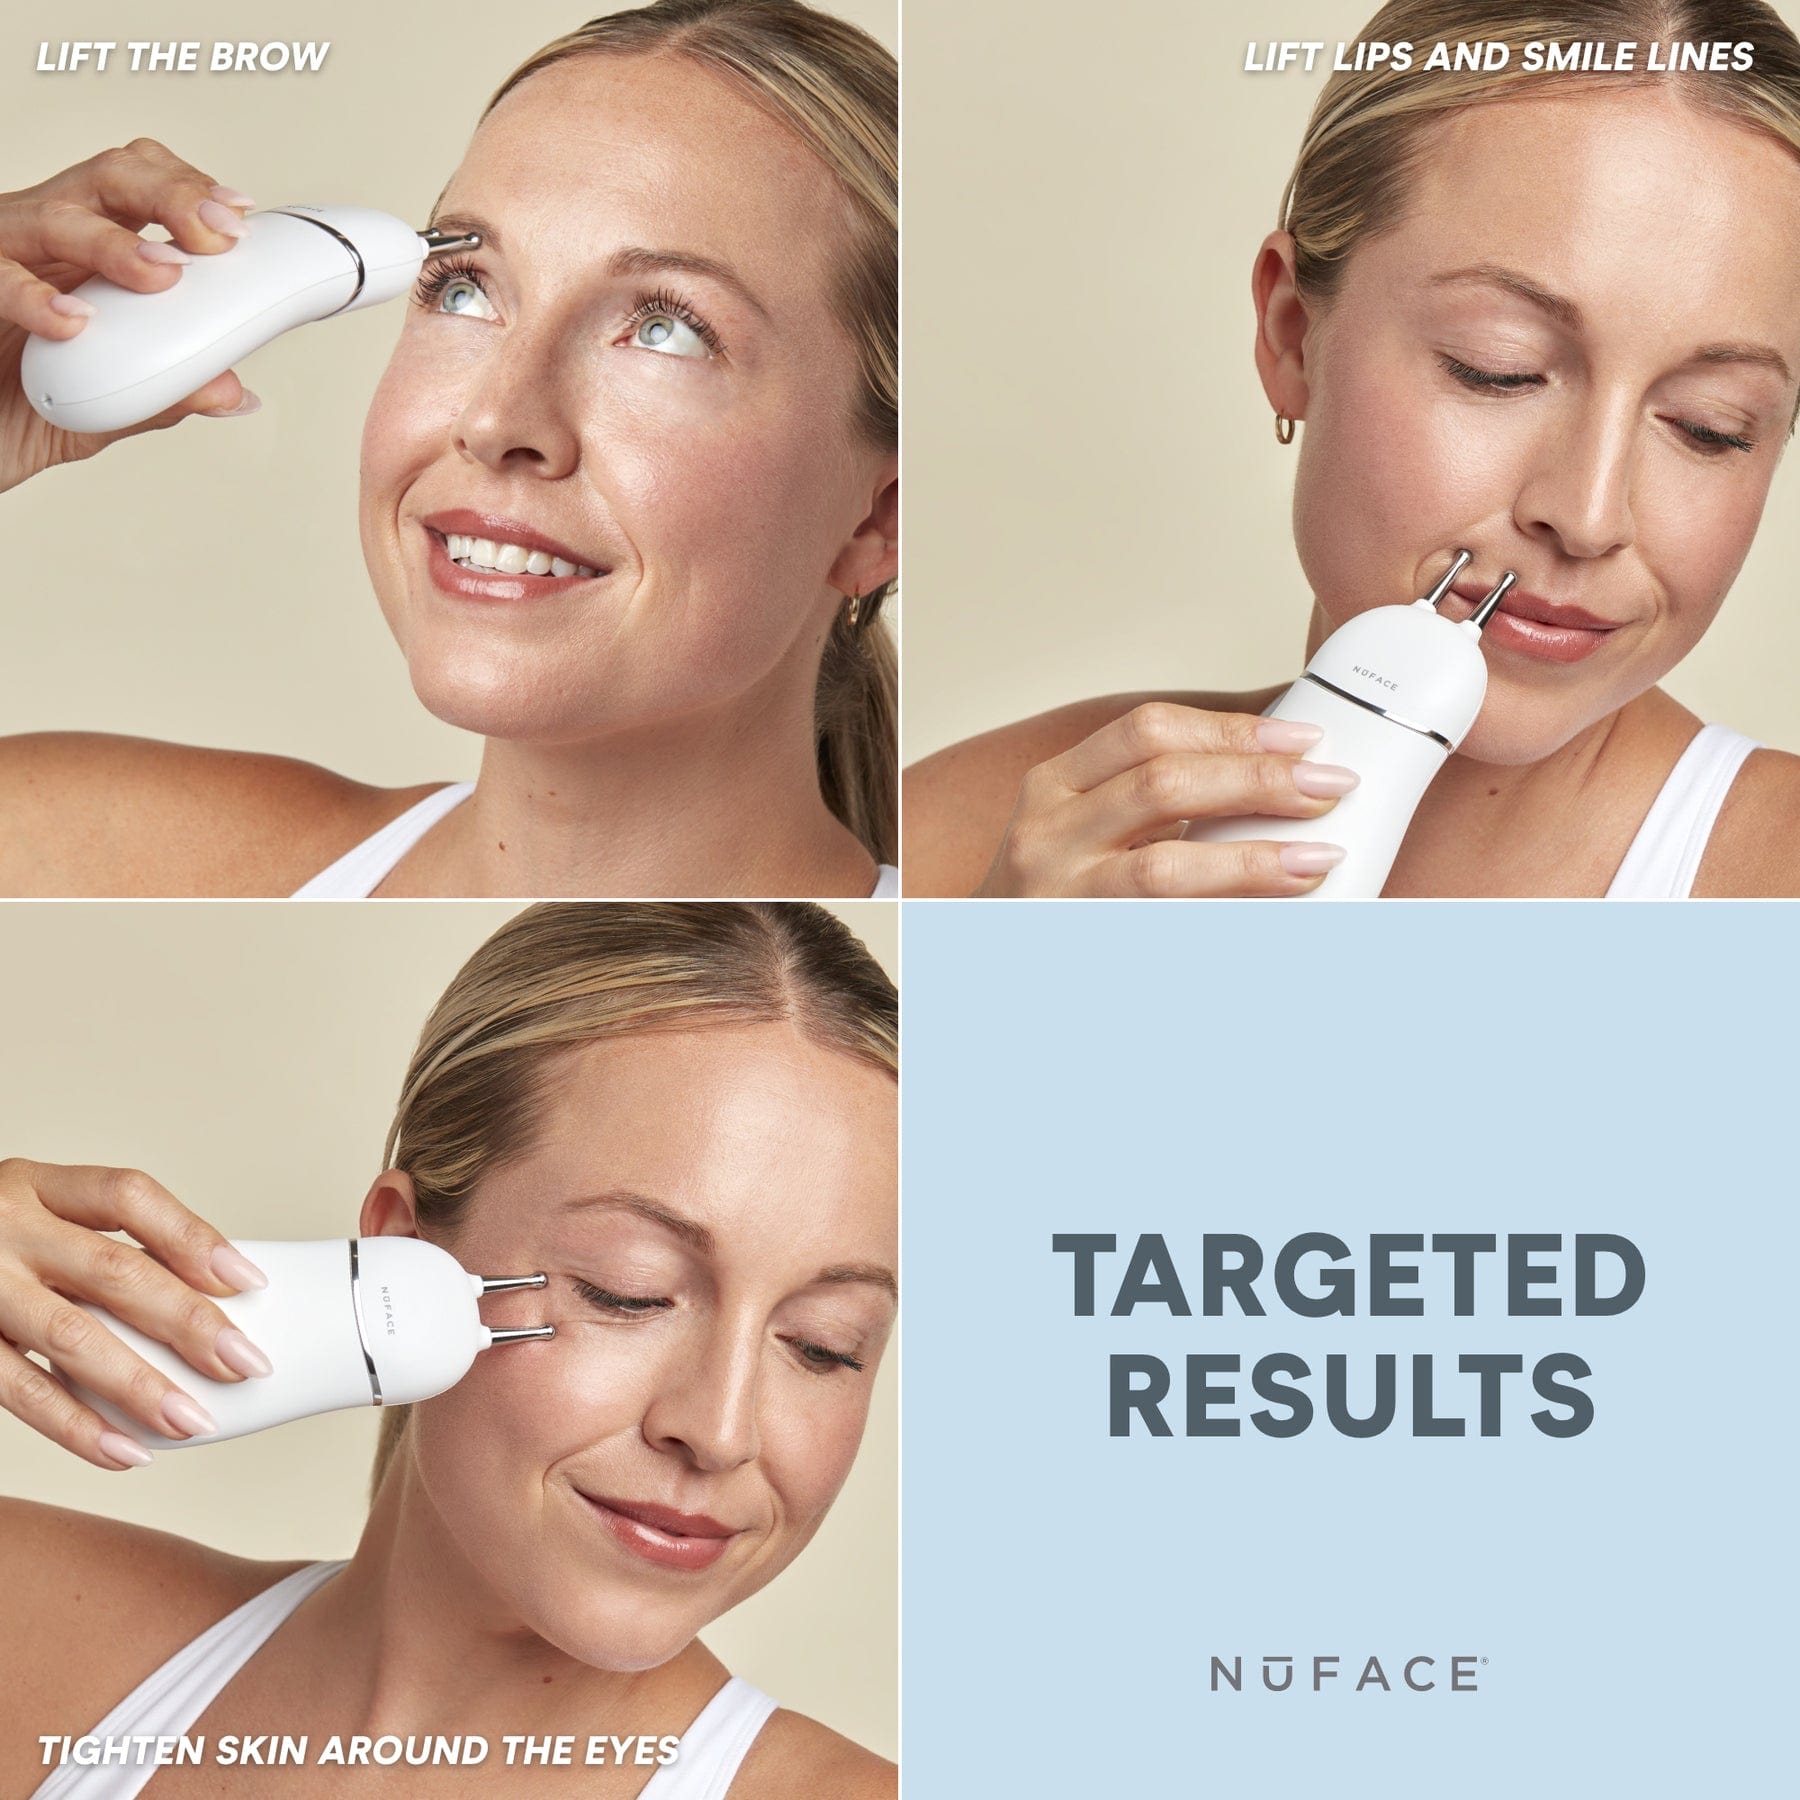 TRINITY+ Effective Lip & Eye Attachment - Targeted Attachment for TRINITY+